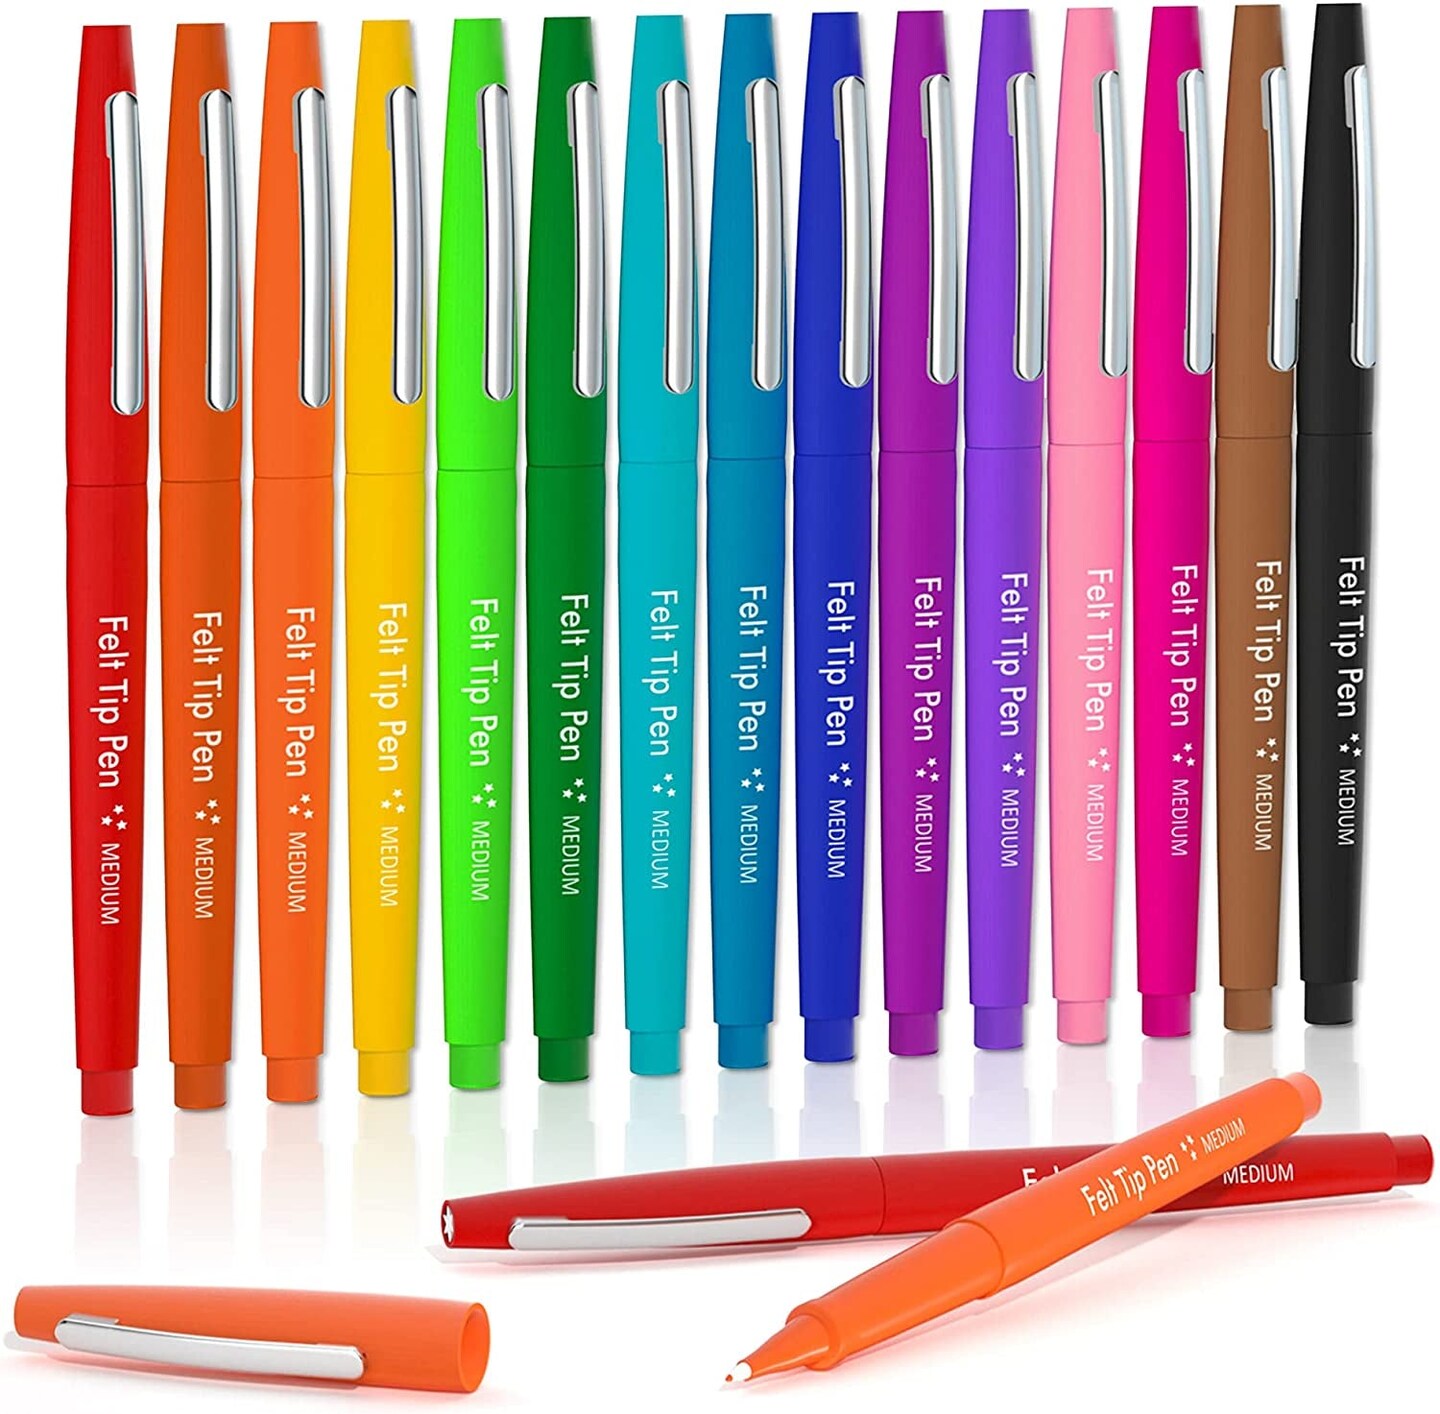 Lelix 60 Colors Felt Tip Pens, Medium Point Felt Pens, Assorted Colors  Markers Pens For Journaling, Writing, Note Taking, Planner Coloring,  Perfect as